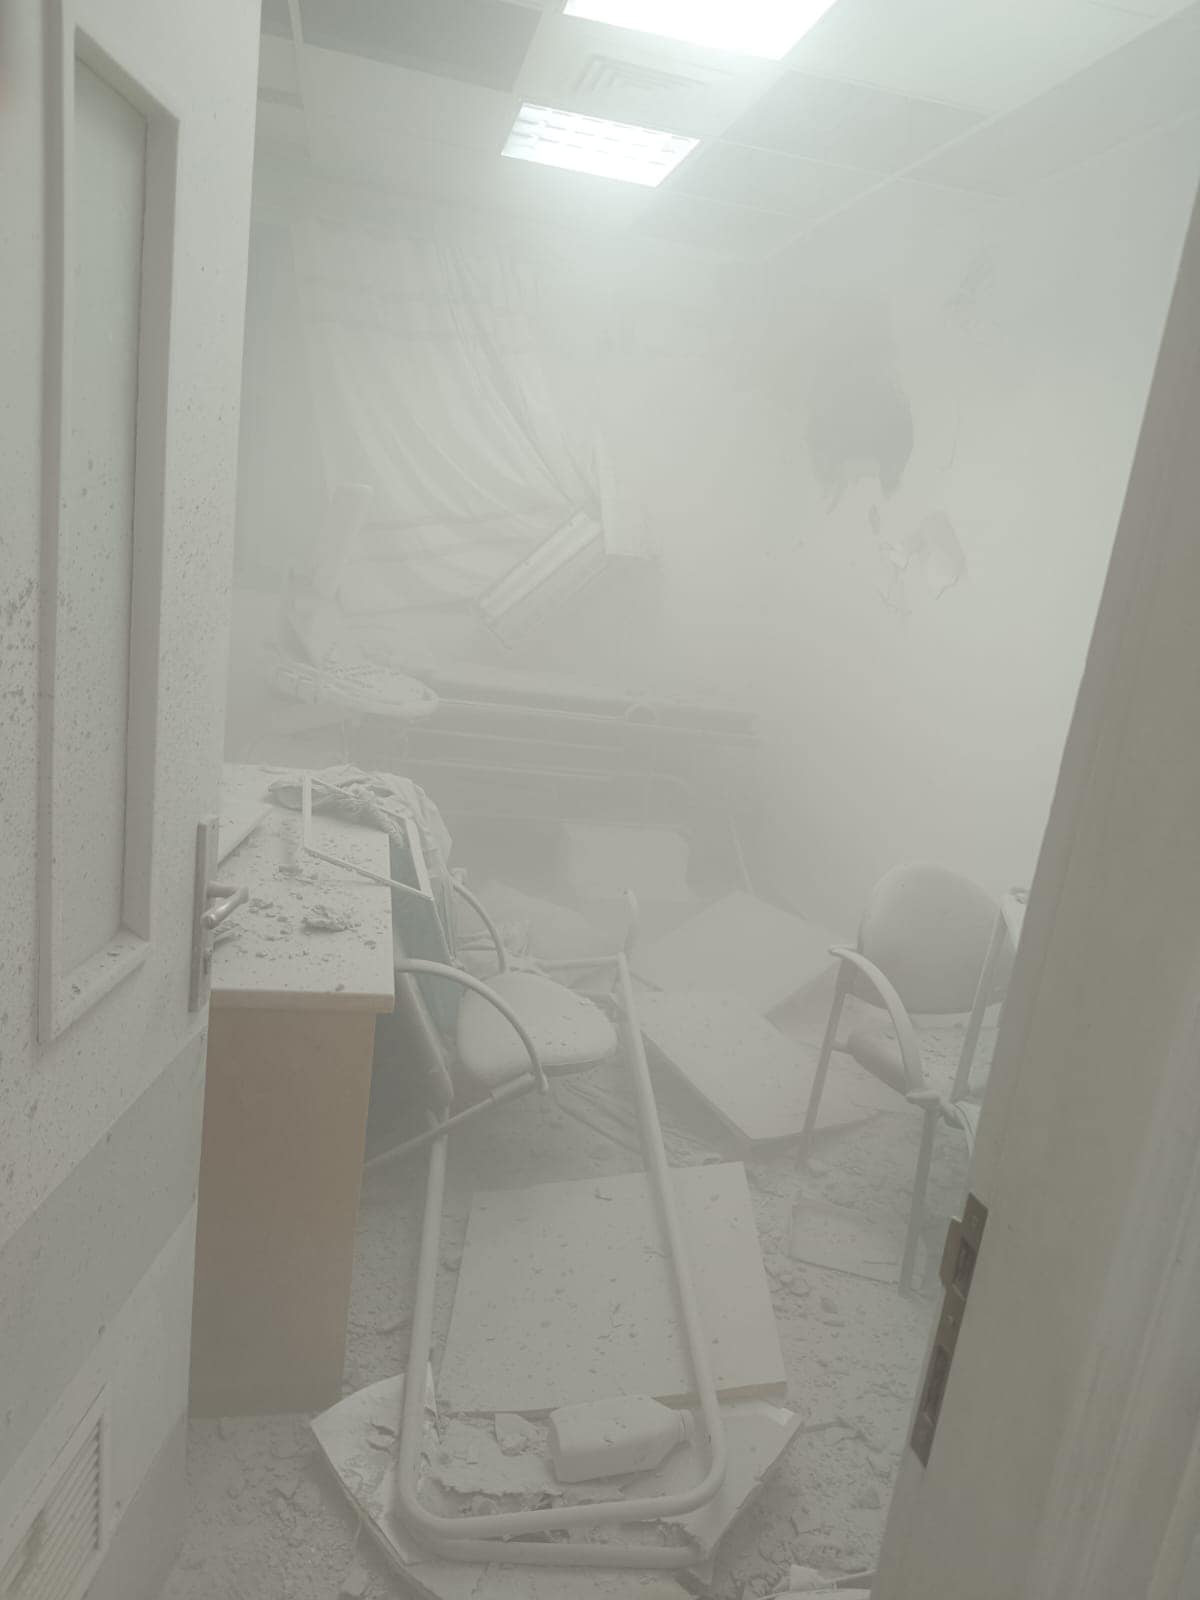 One of the rooms inside the Al-Ahli hospital after the air strike. © Diocese of Jerusalem. Used with permission.